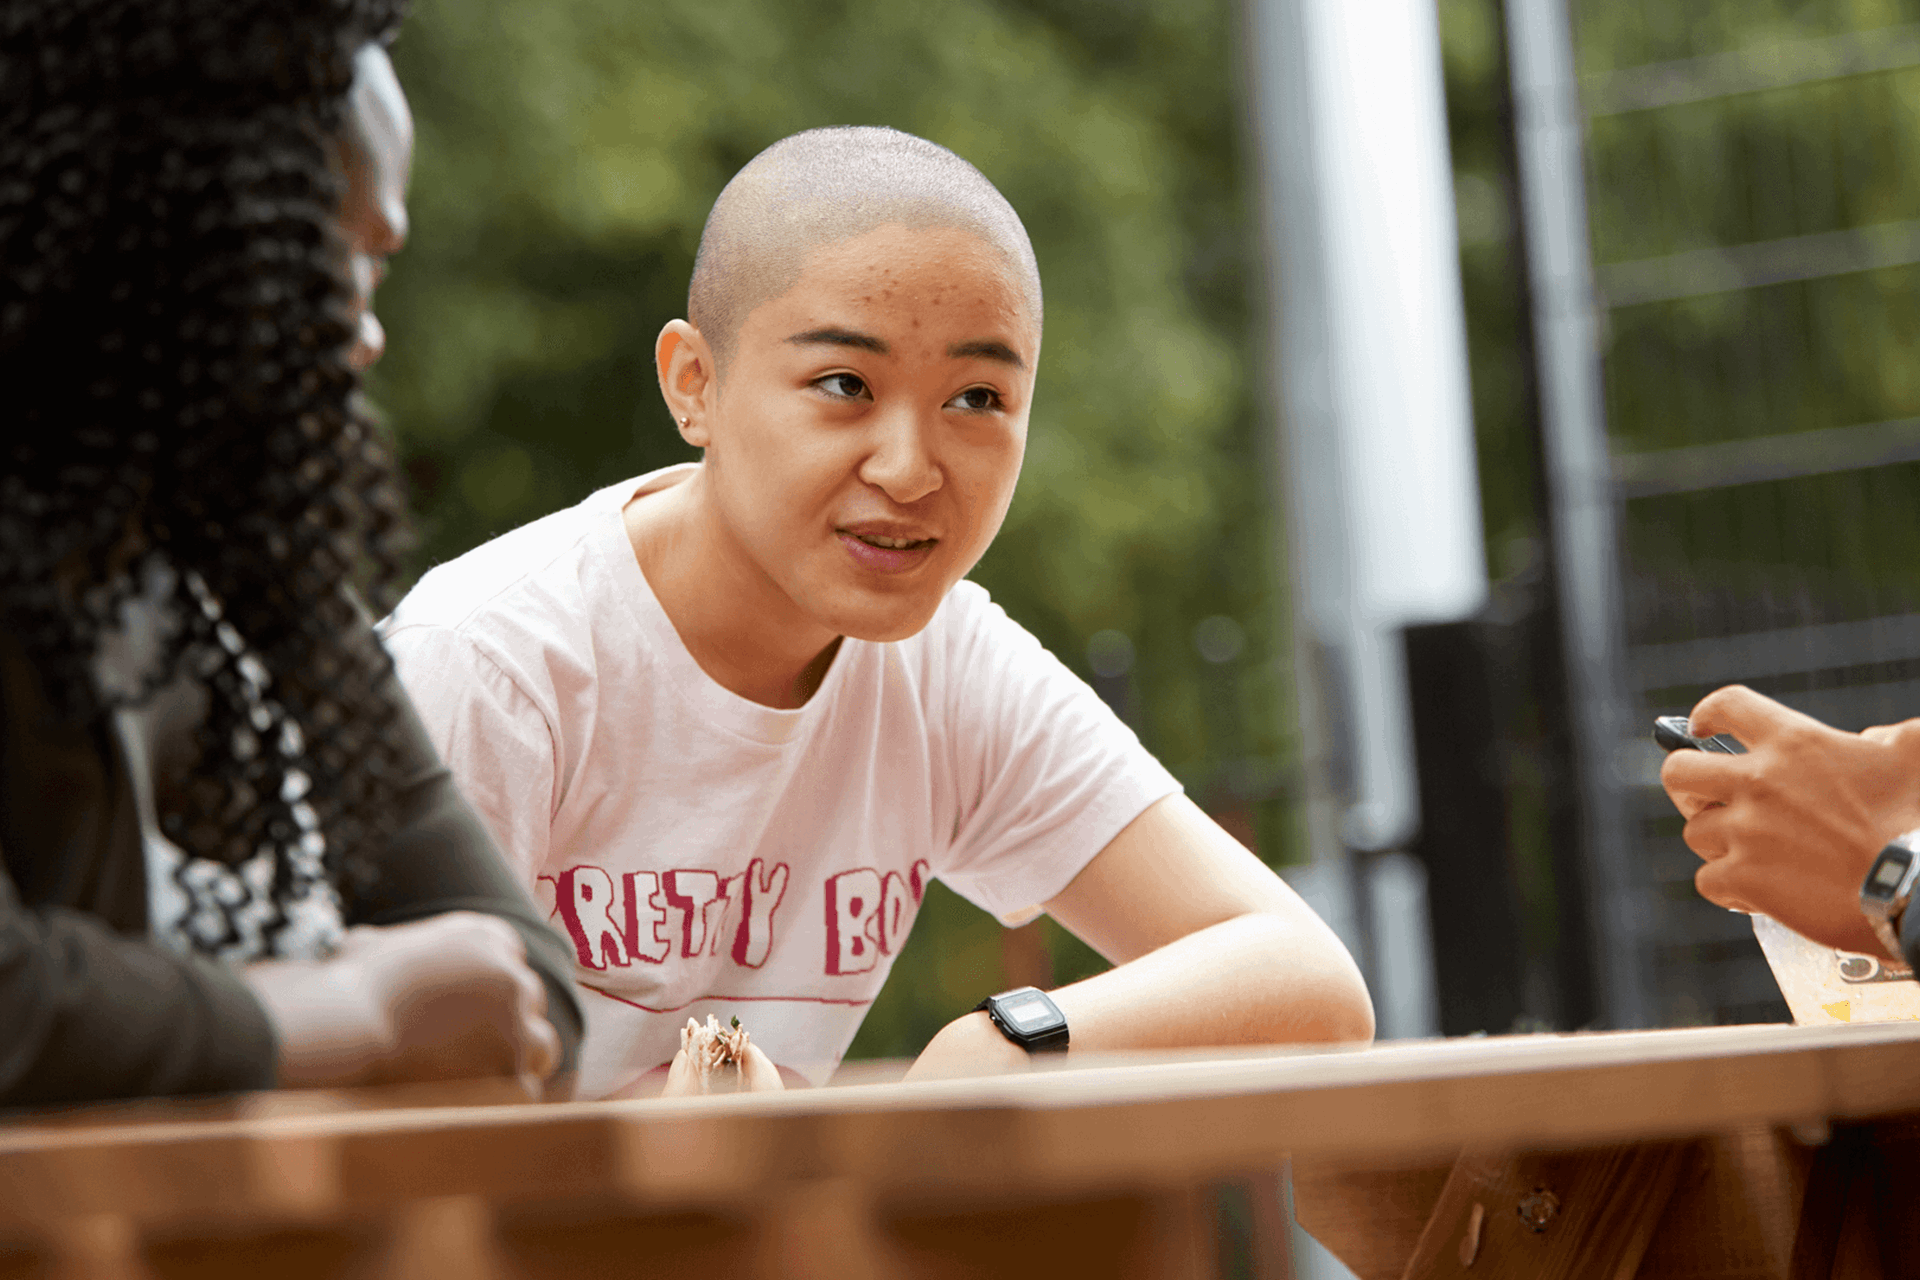 a-young-woman-with-shaved-head-talking-to-her-friends-while-sitting-on-a-dining-bench-in-a-park